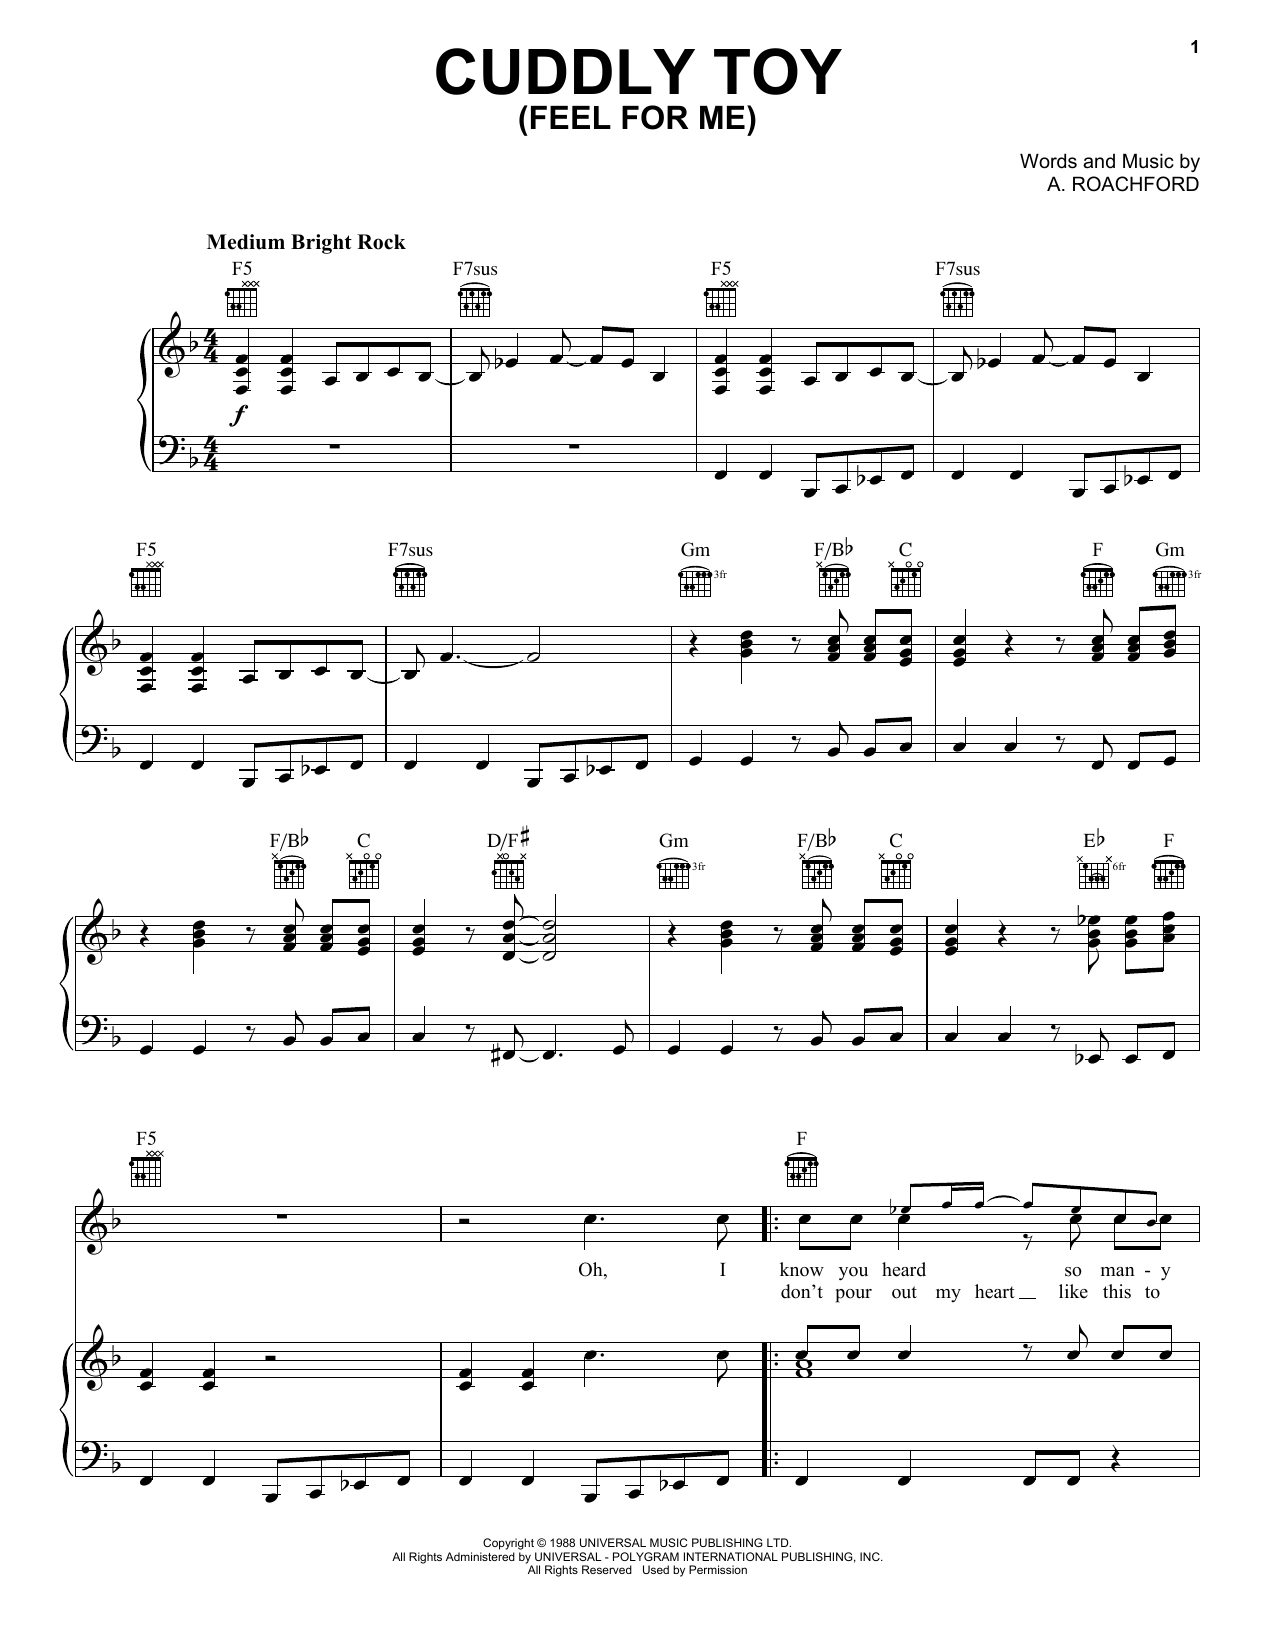 Download Roachford Cuddly Toy (Feel For Me) Sheet Music